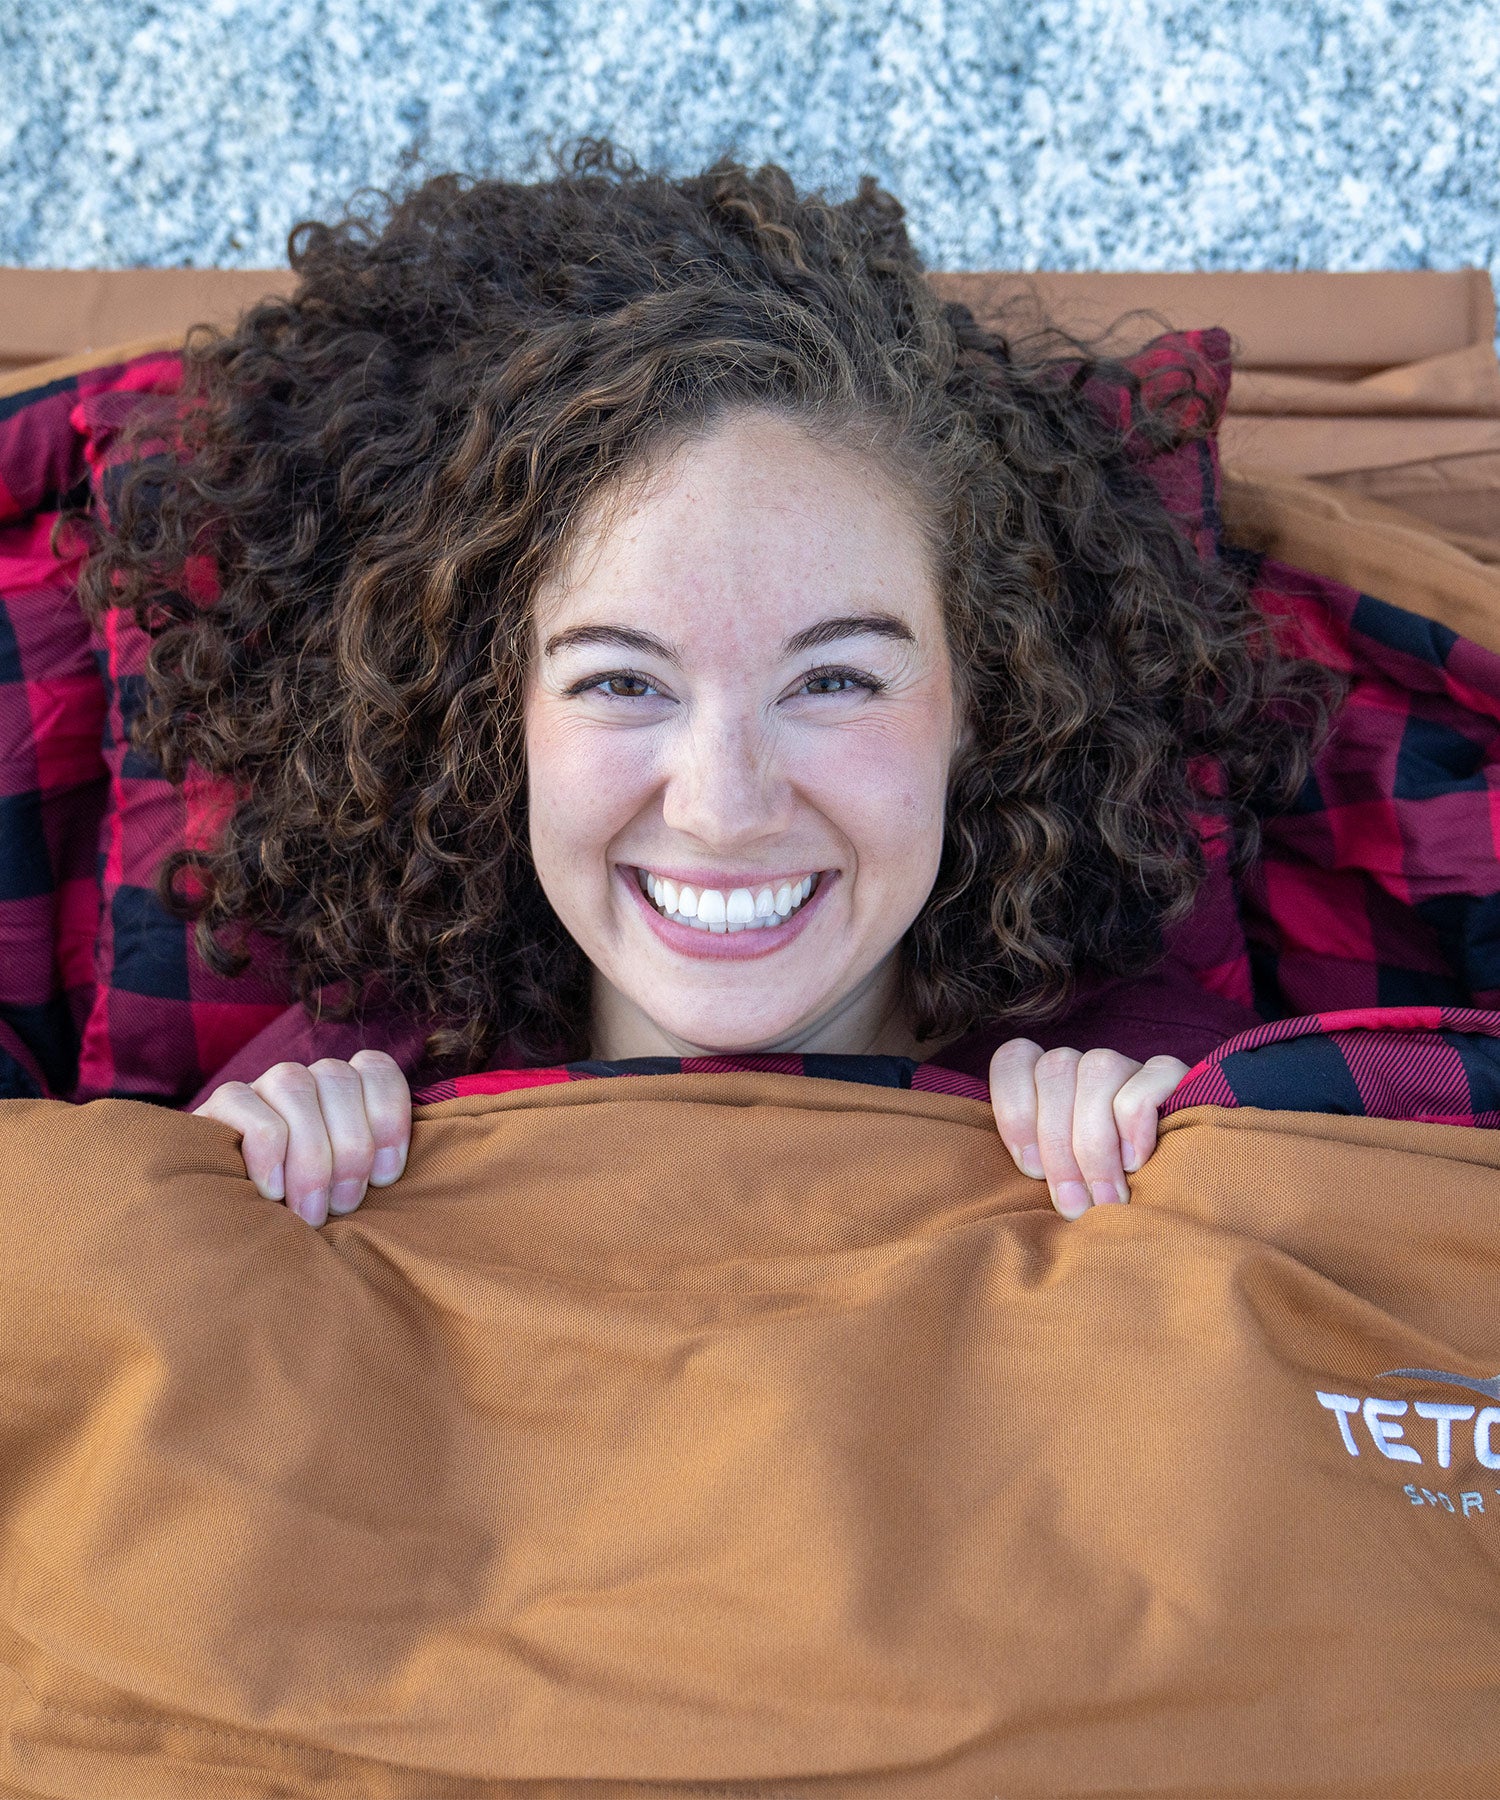 Image shows a woman smiling while snuggled in a brown TETON Sports Bridger Canvas Sleeping Bag.